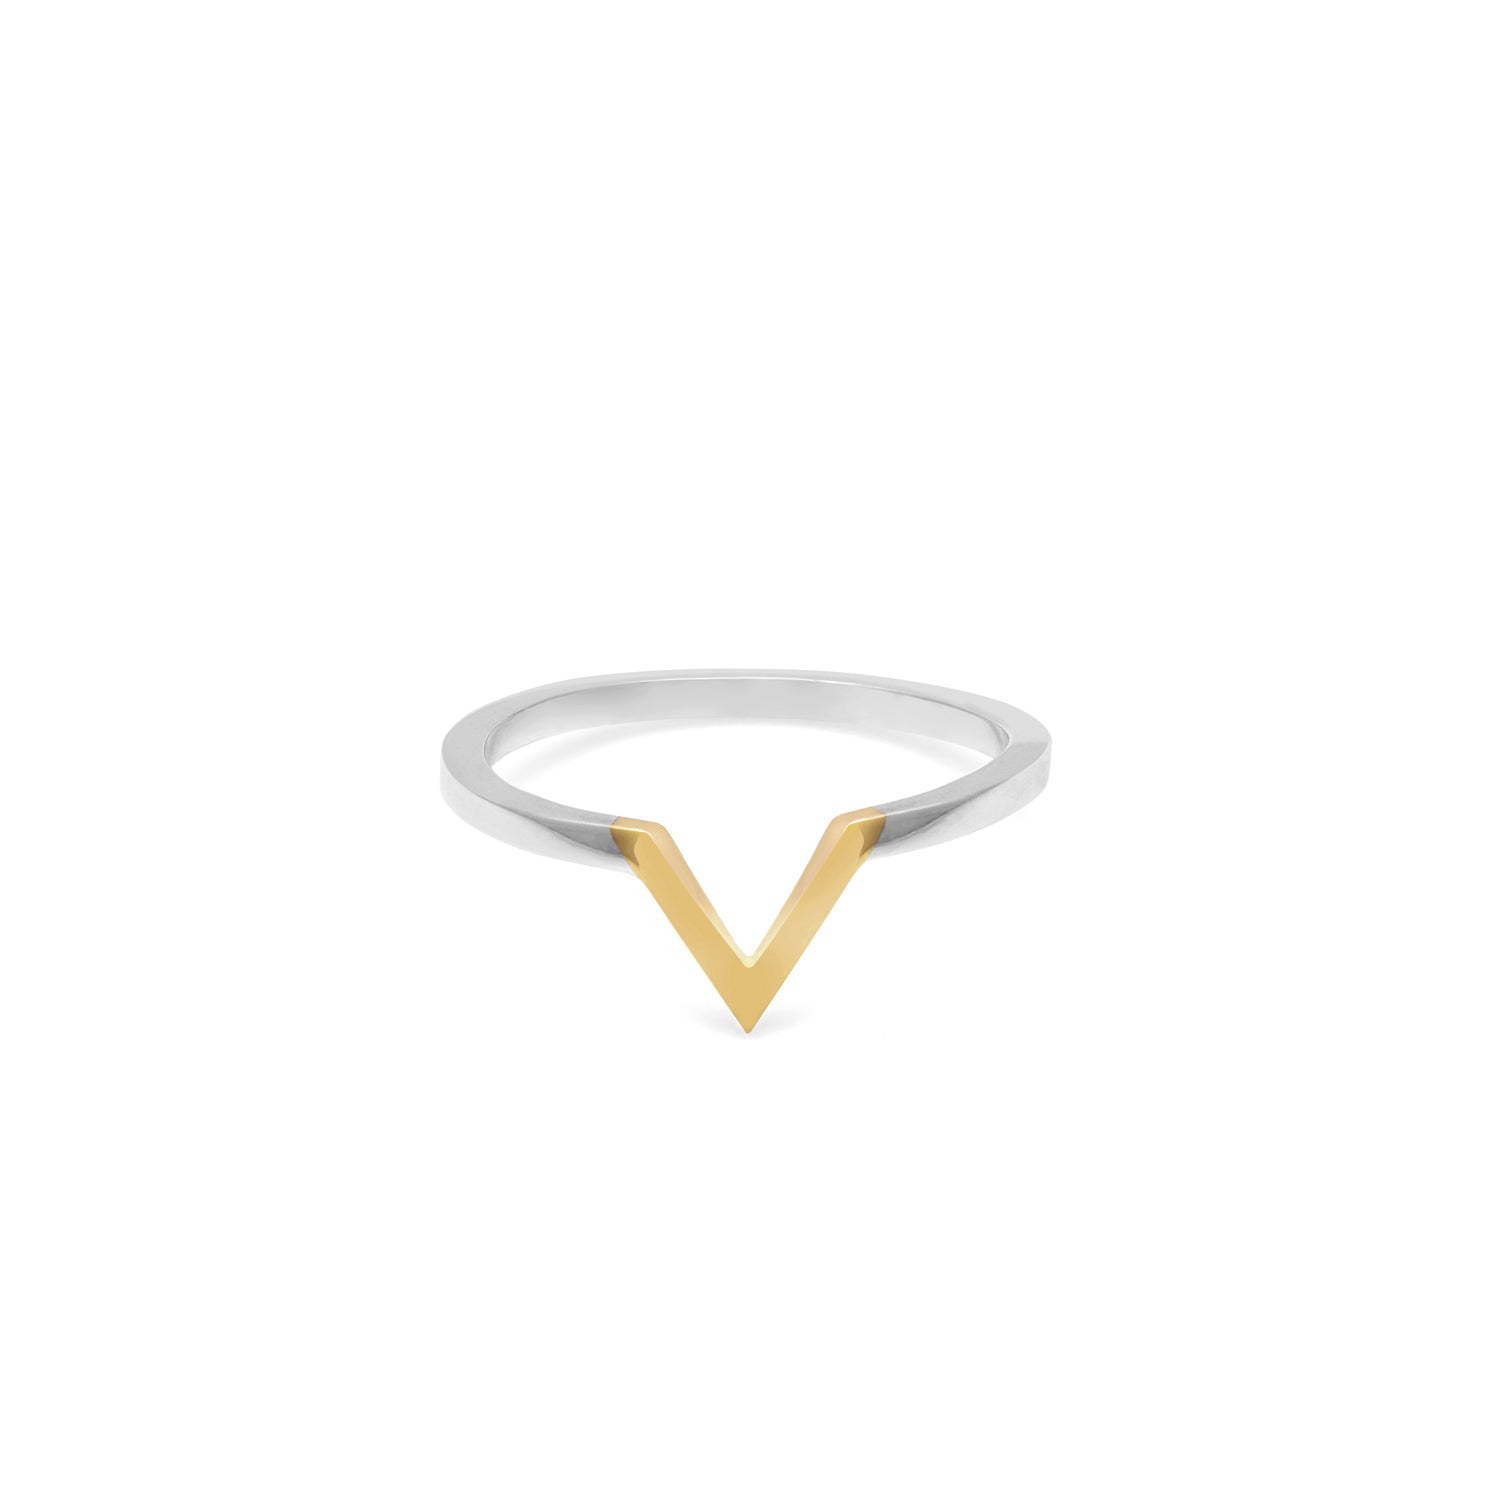 Two-tone Triangle Ring - 18k Yellow & White Gold - Myia Bonner Jewellery